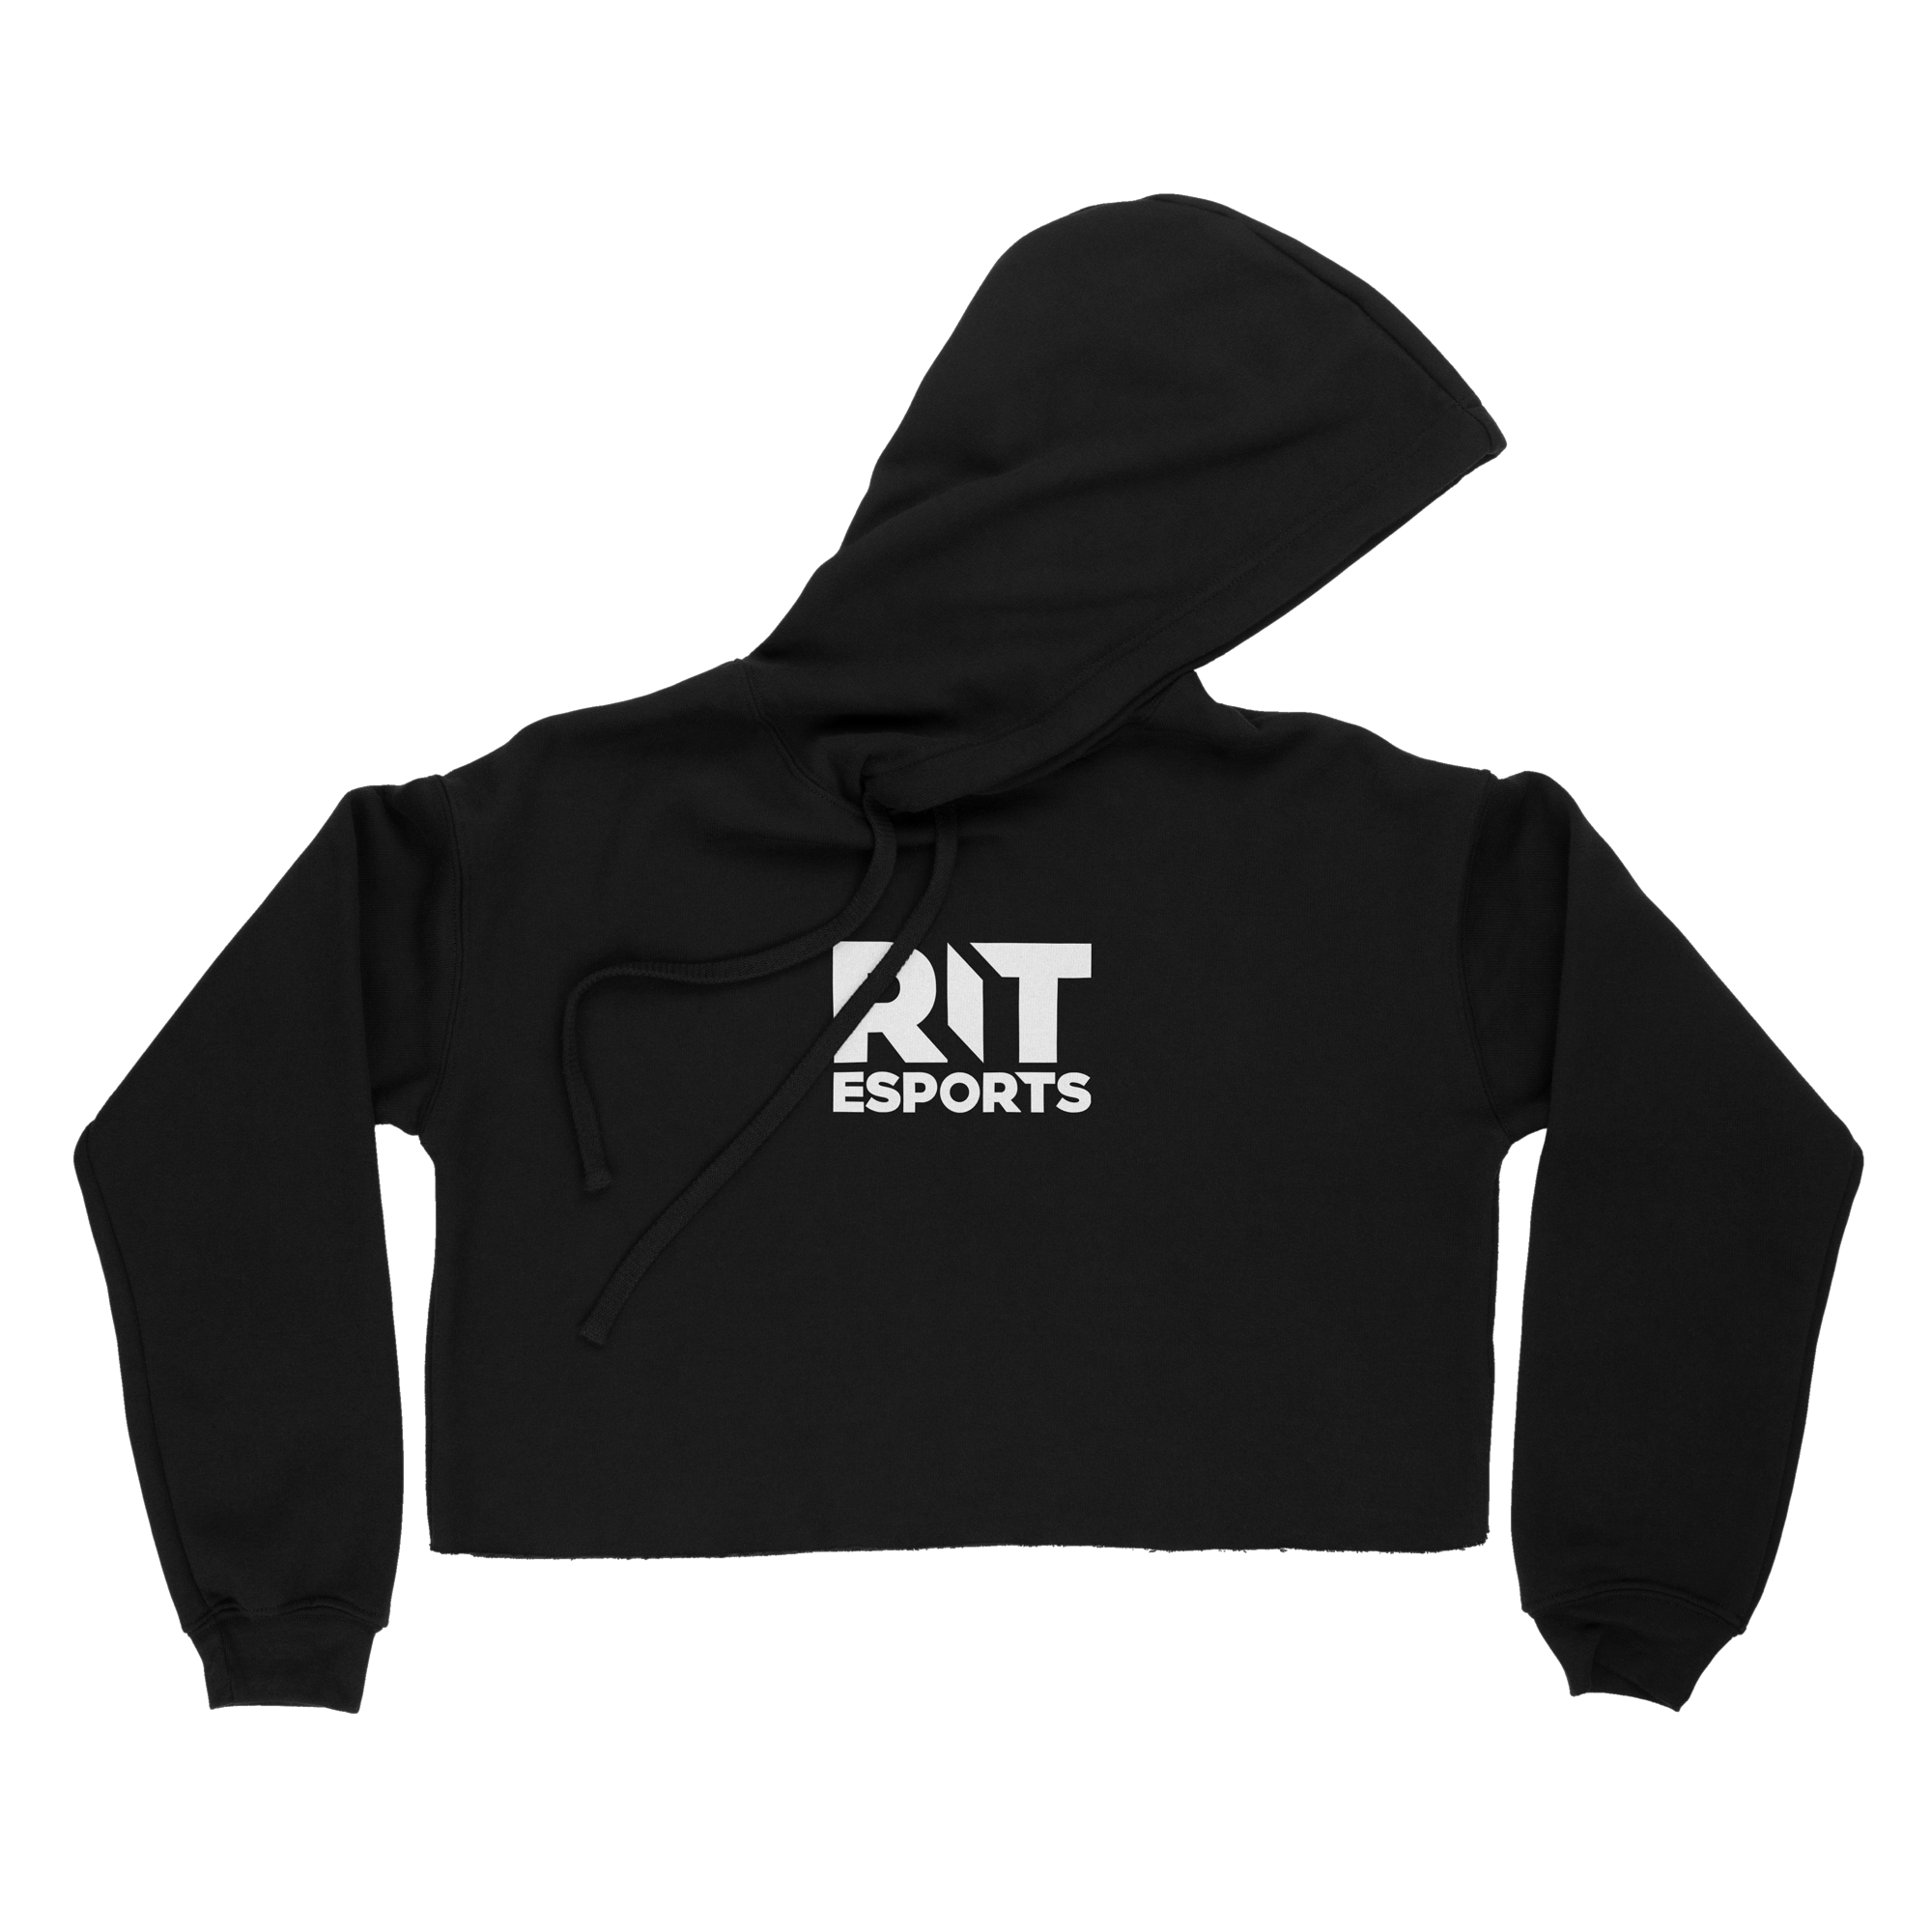 RIT Esports Classic Cropped Hoodie